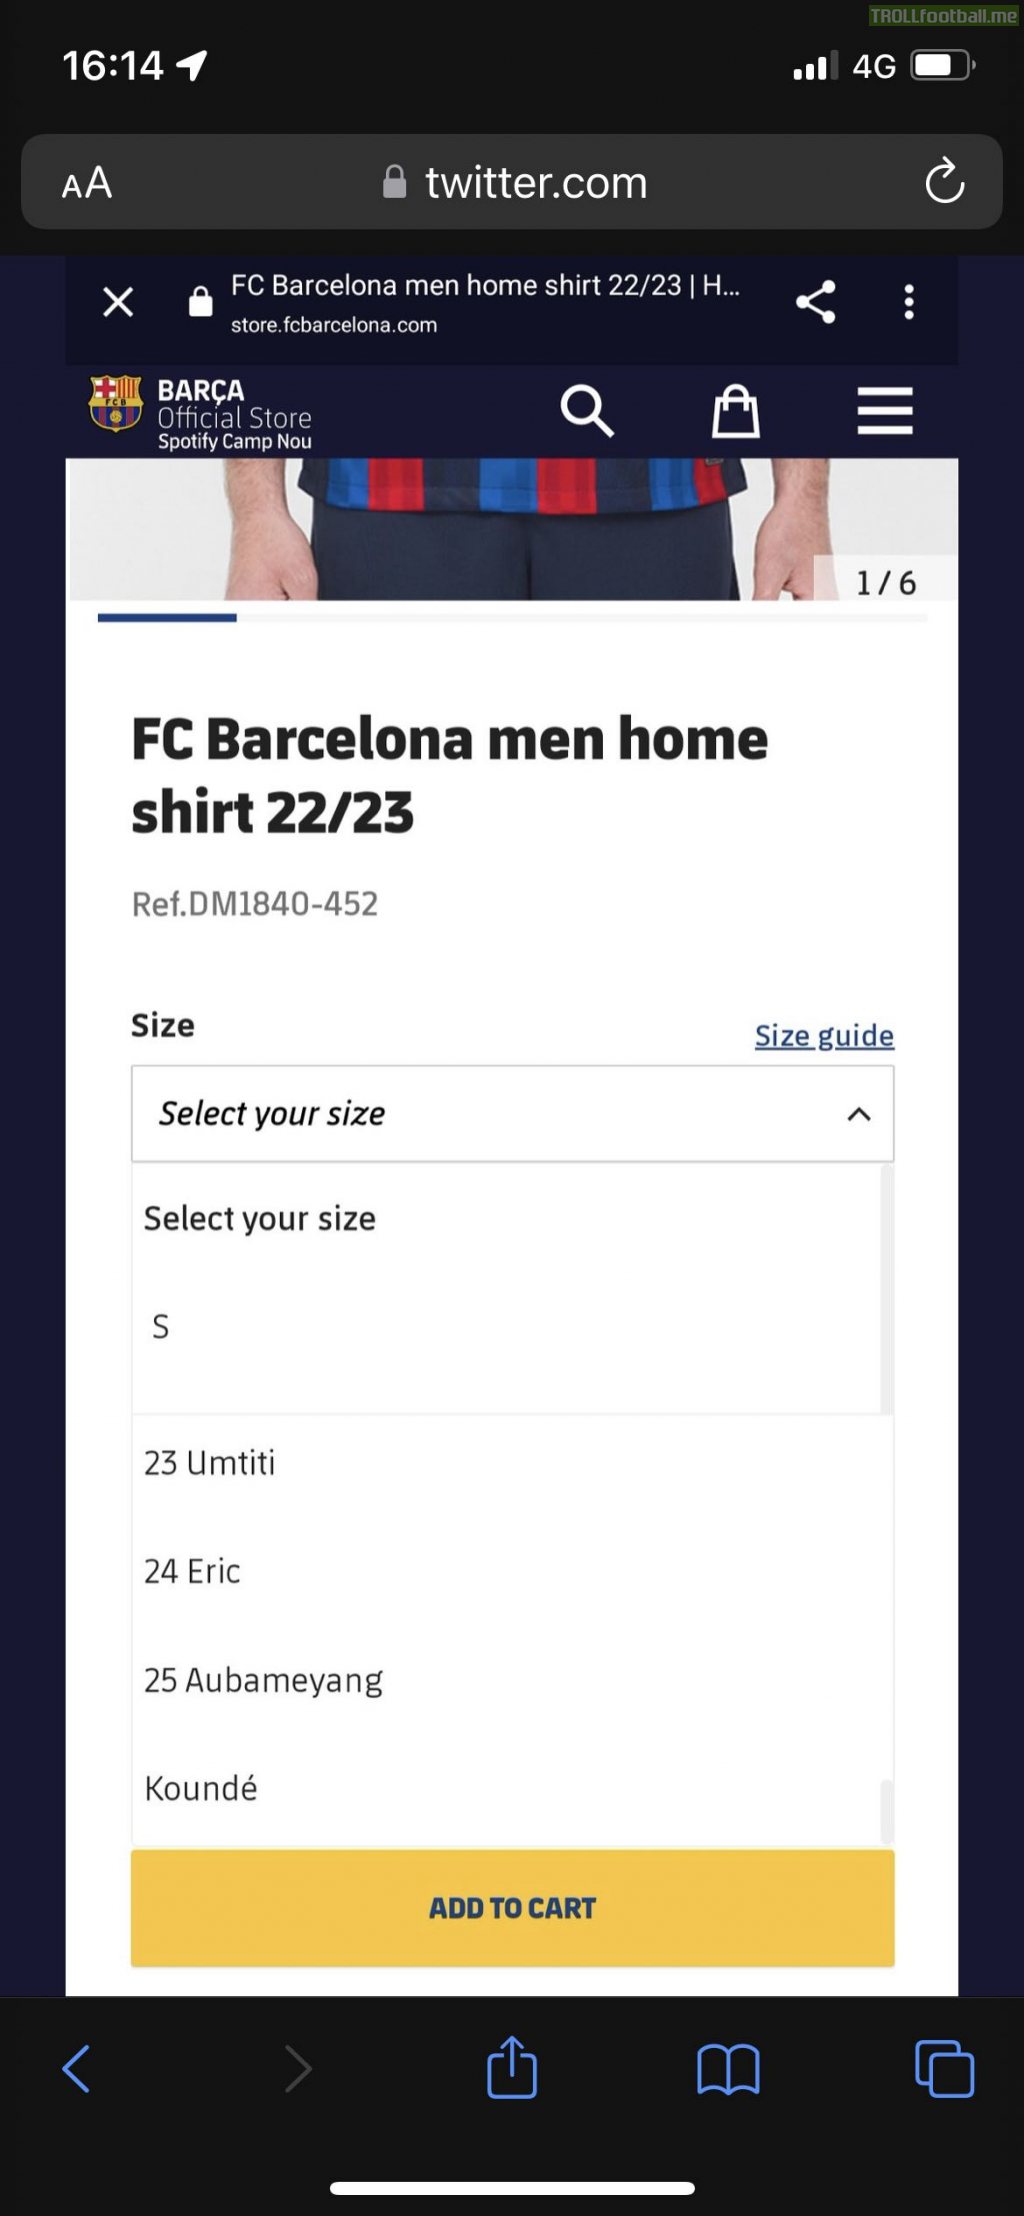 FC Barcelona accidentally leaked Kounde in the Barca store